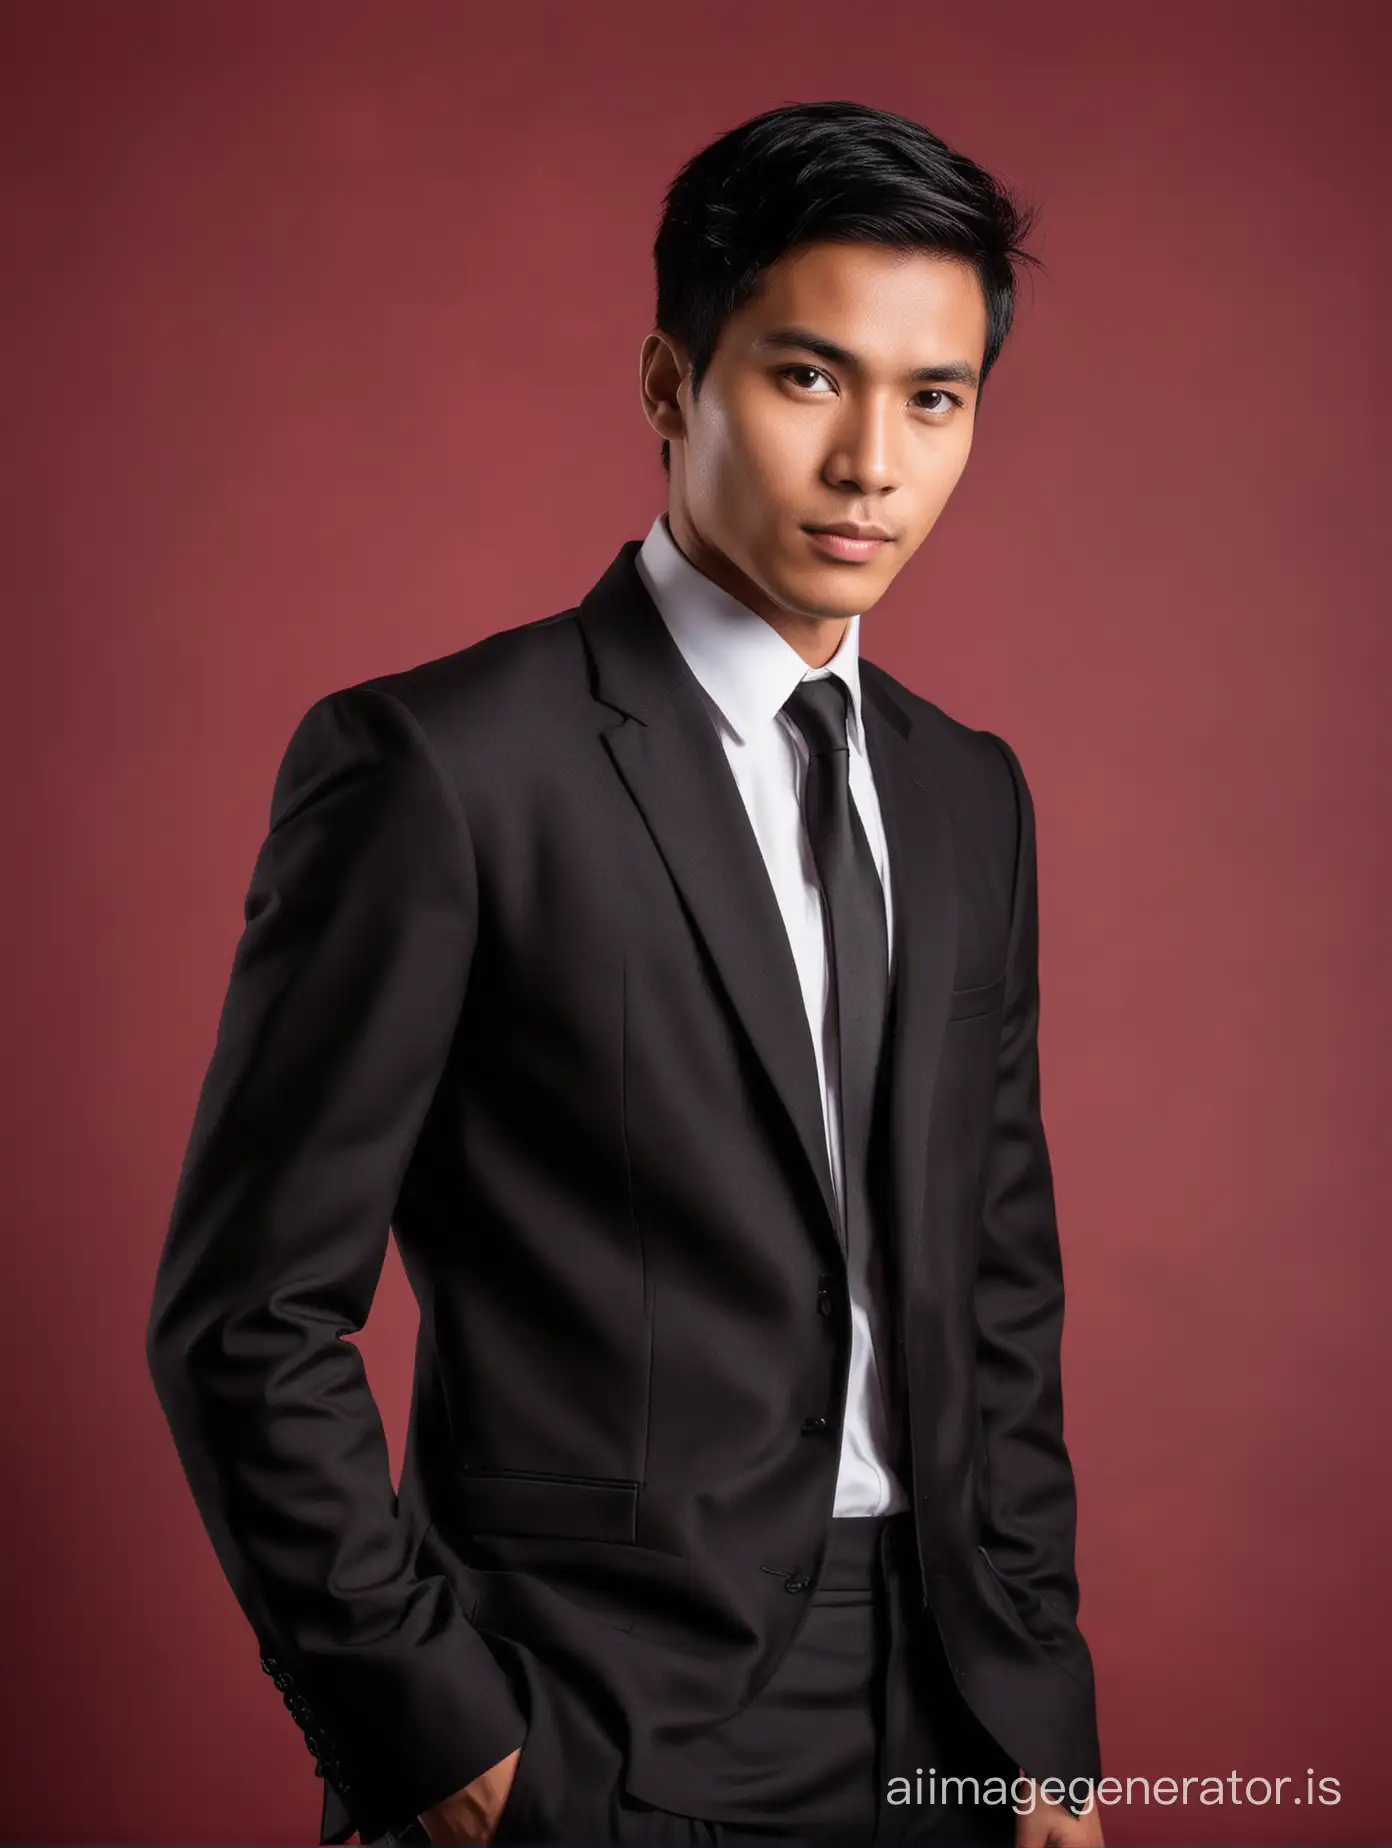 An indonesian handsome young man, black short hair, wearing black sut and black tie, with background red for postcard photo..